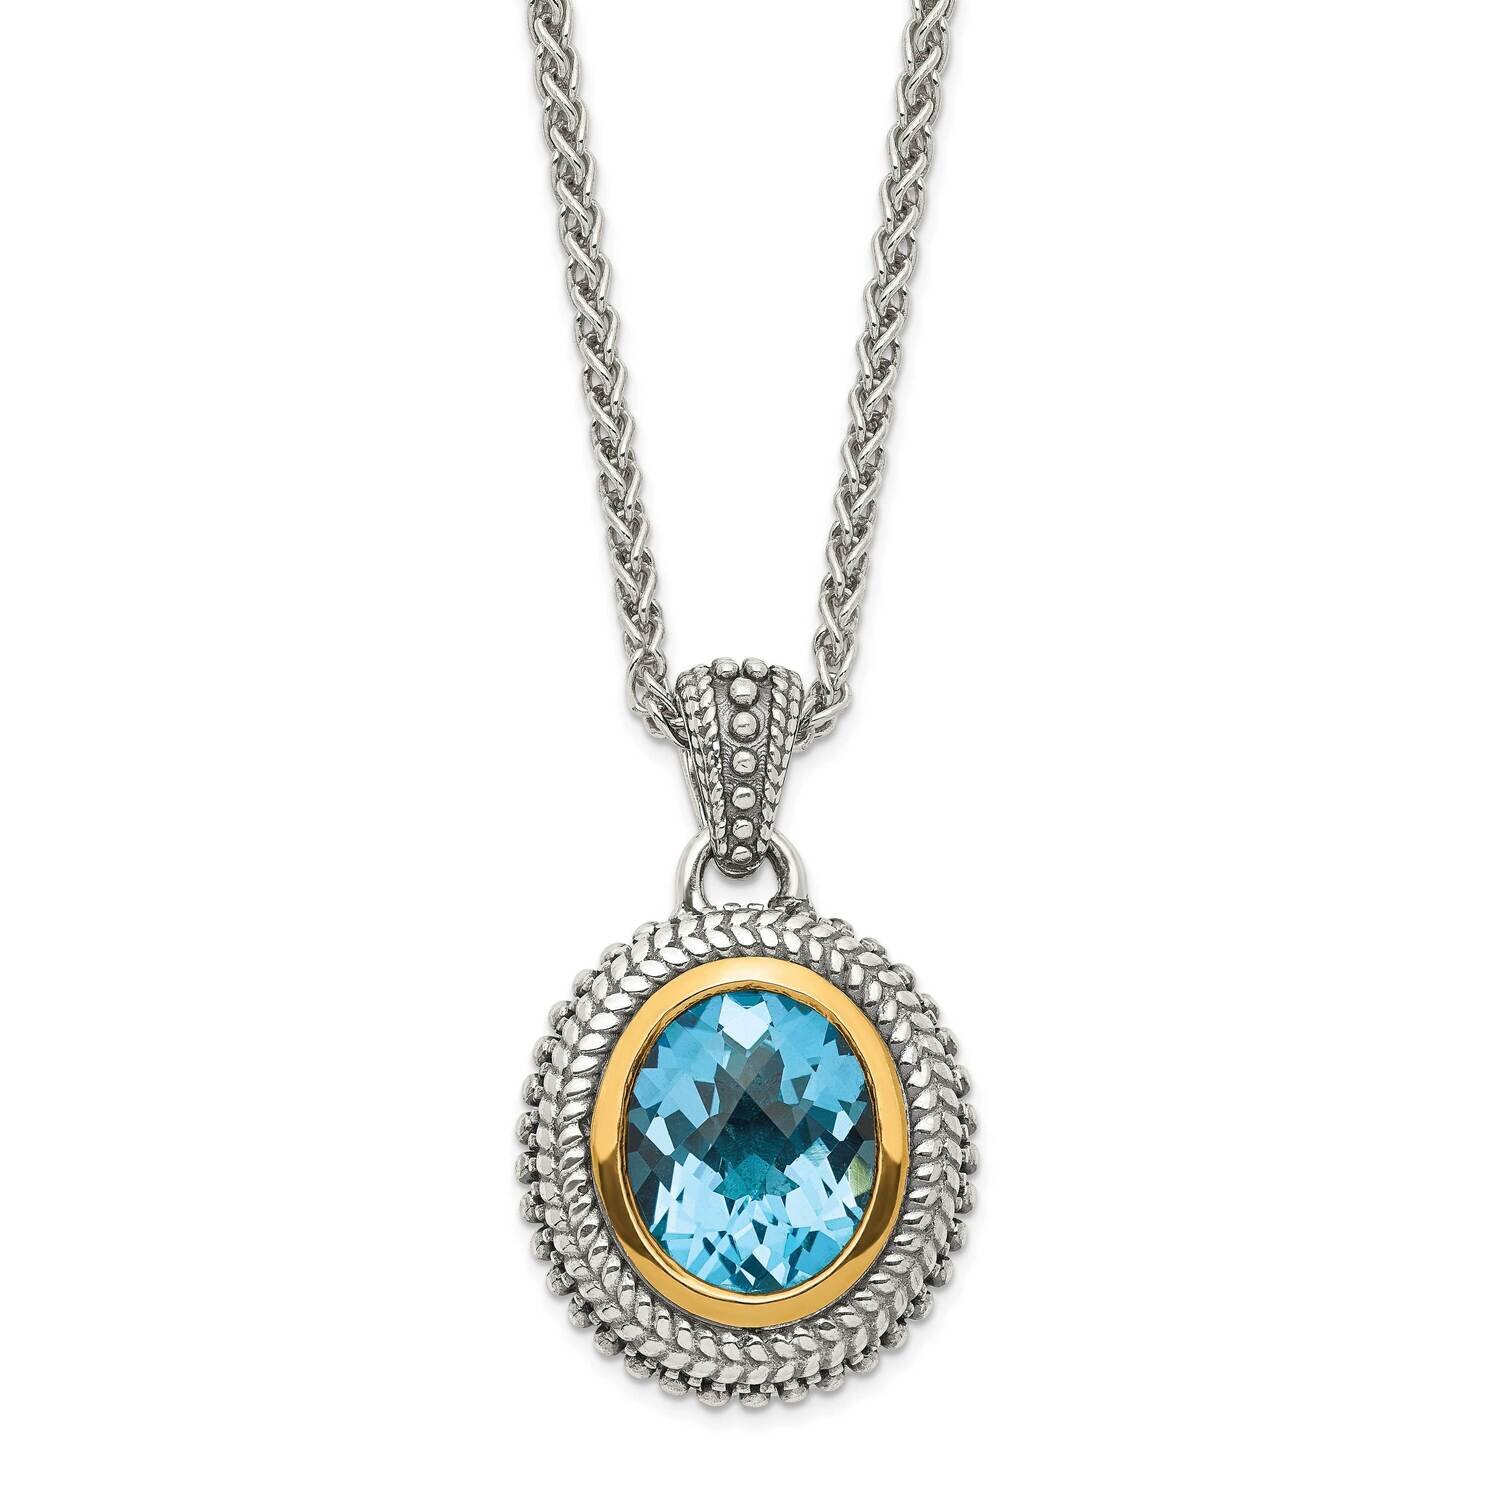 Antiqued Light Swiss Blue Topaz Necklace Sterling Silver with 14k Gold Accent QTC1597